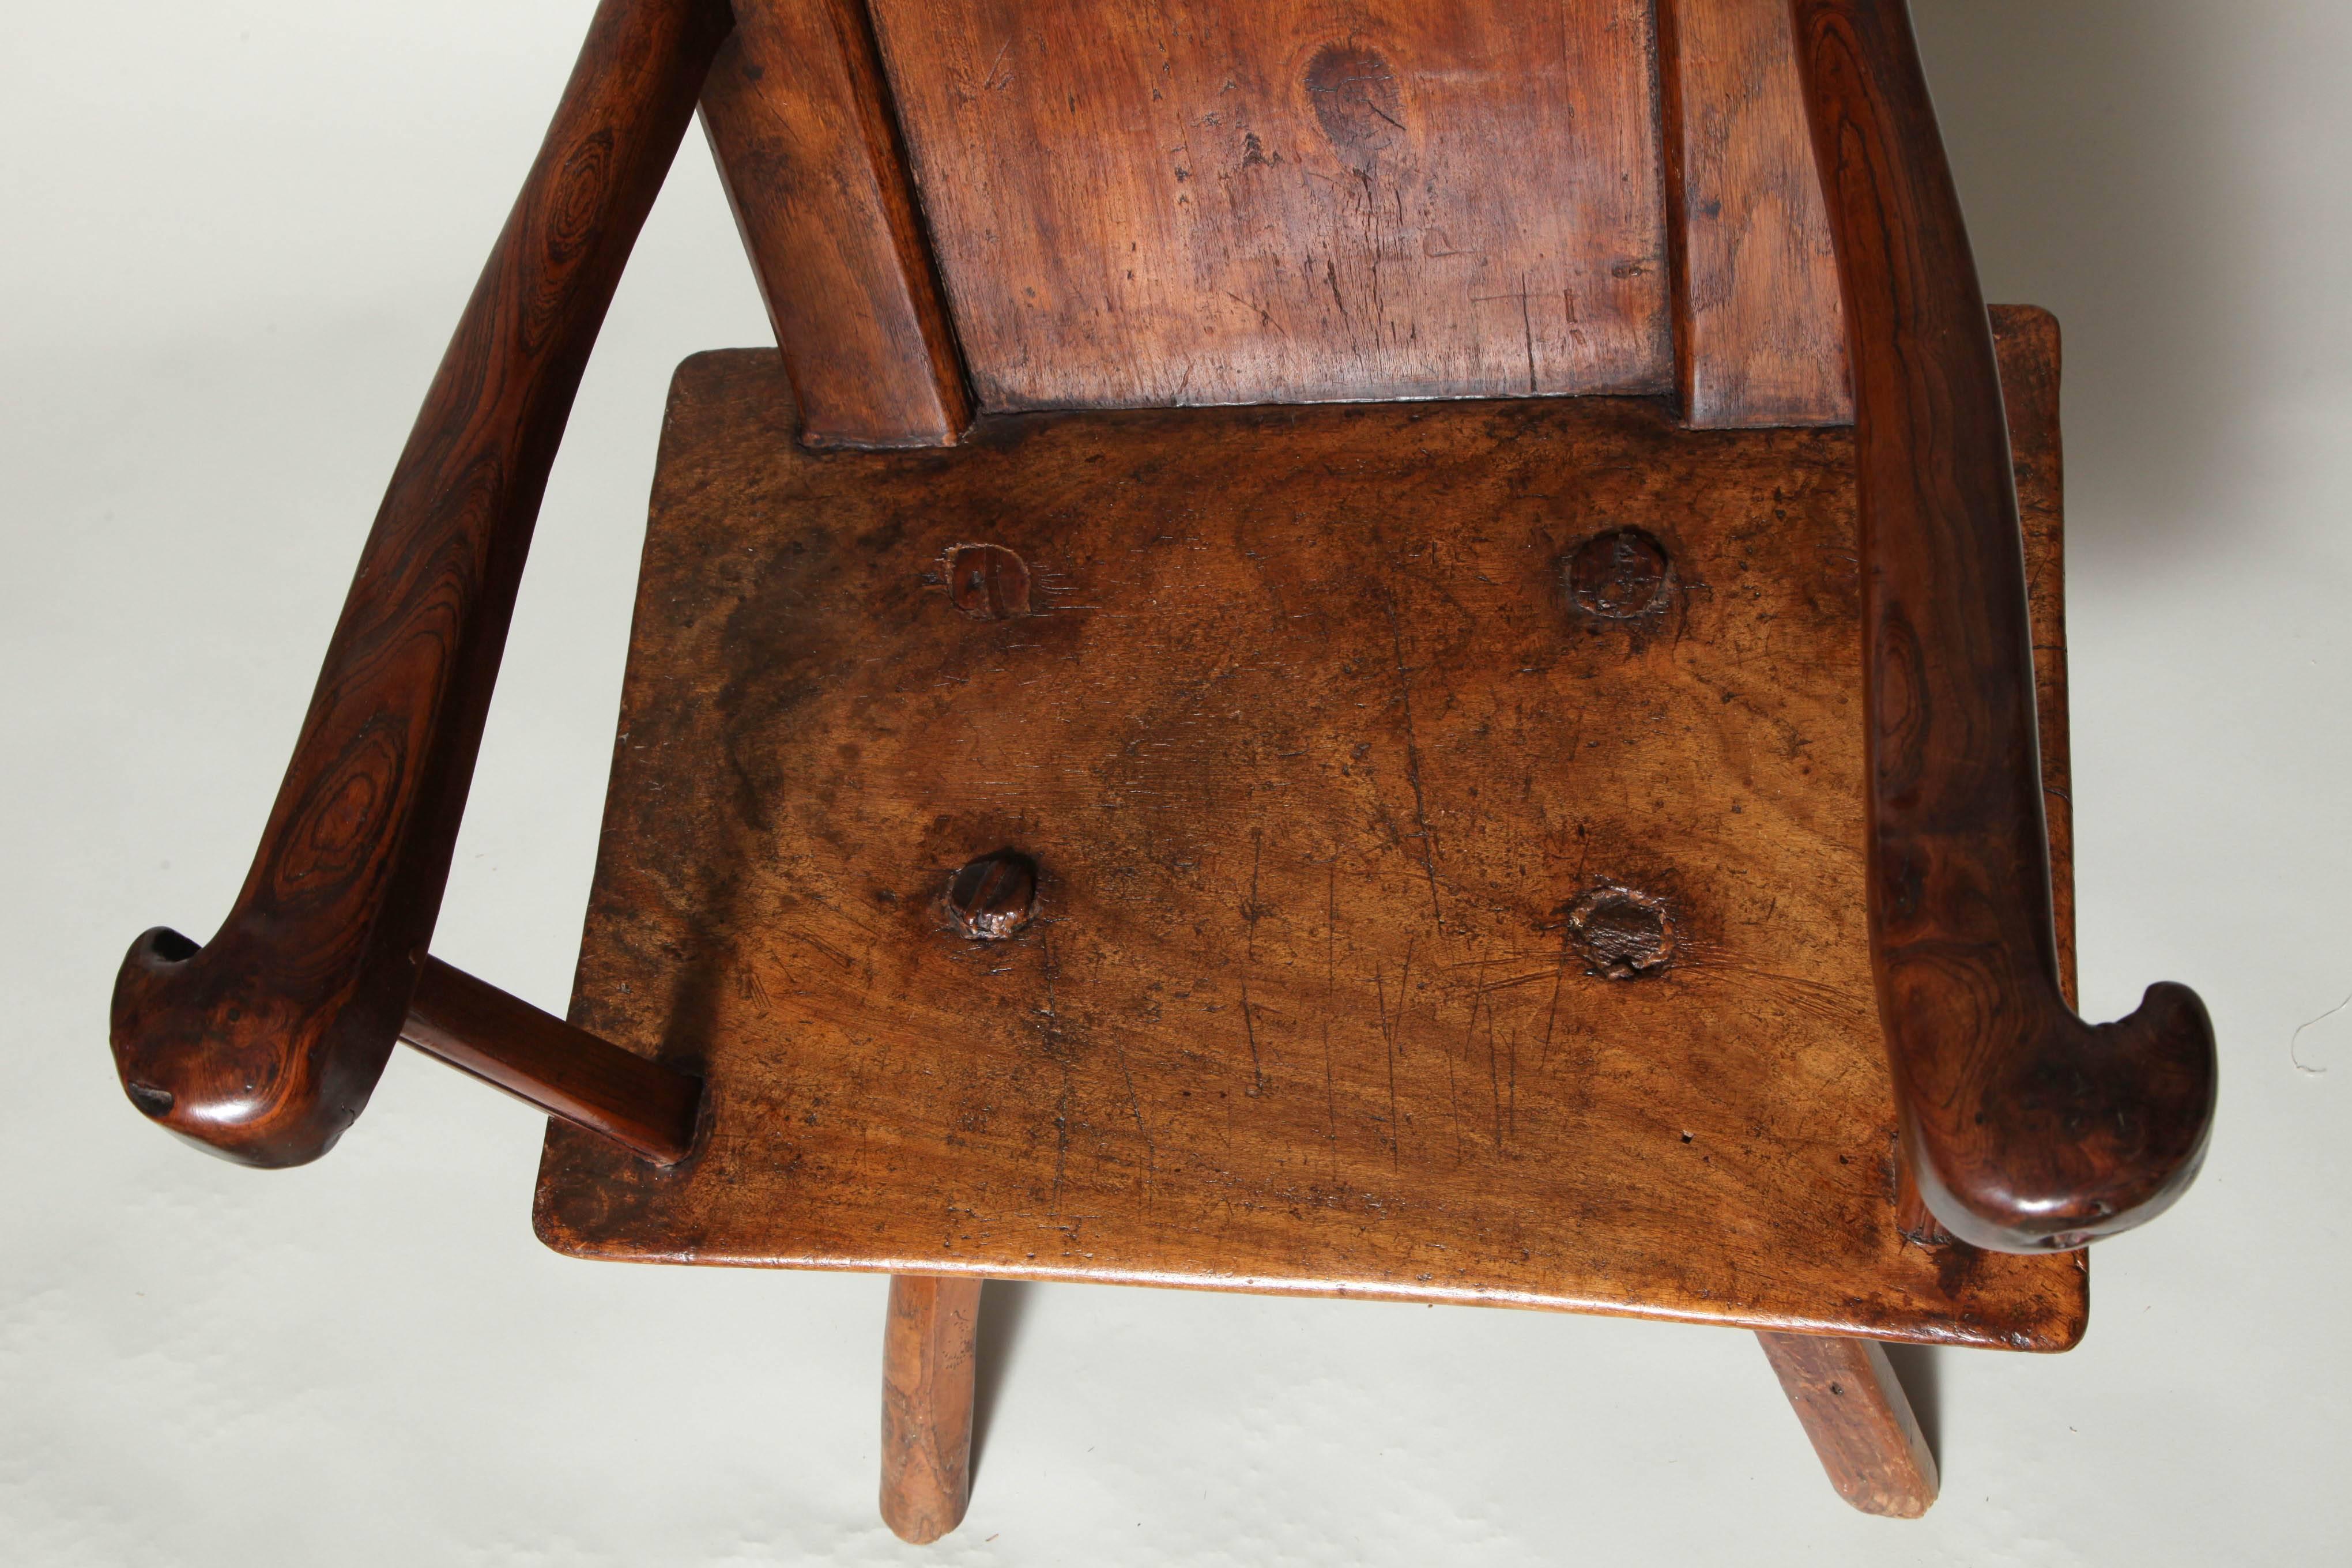 Welsh 18th or Early 19th Century Shepherd's Chair